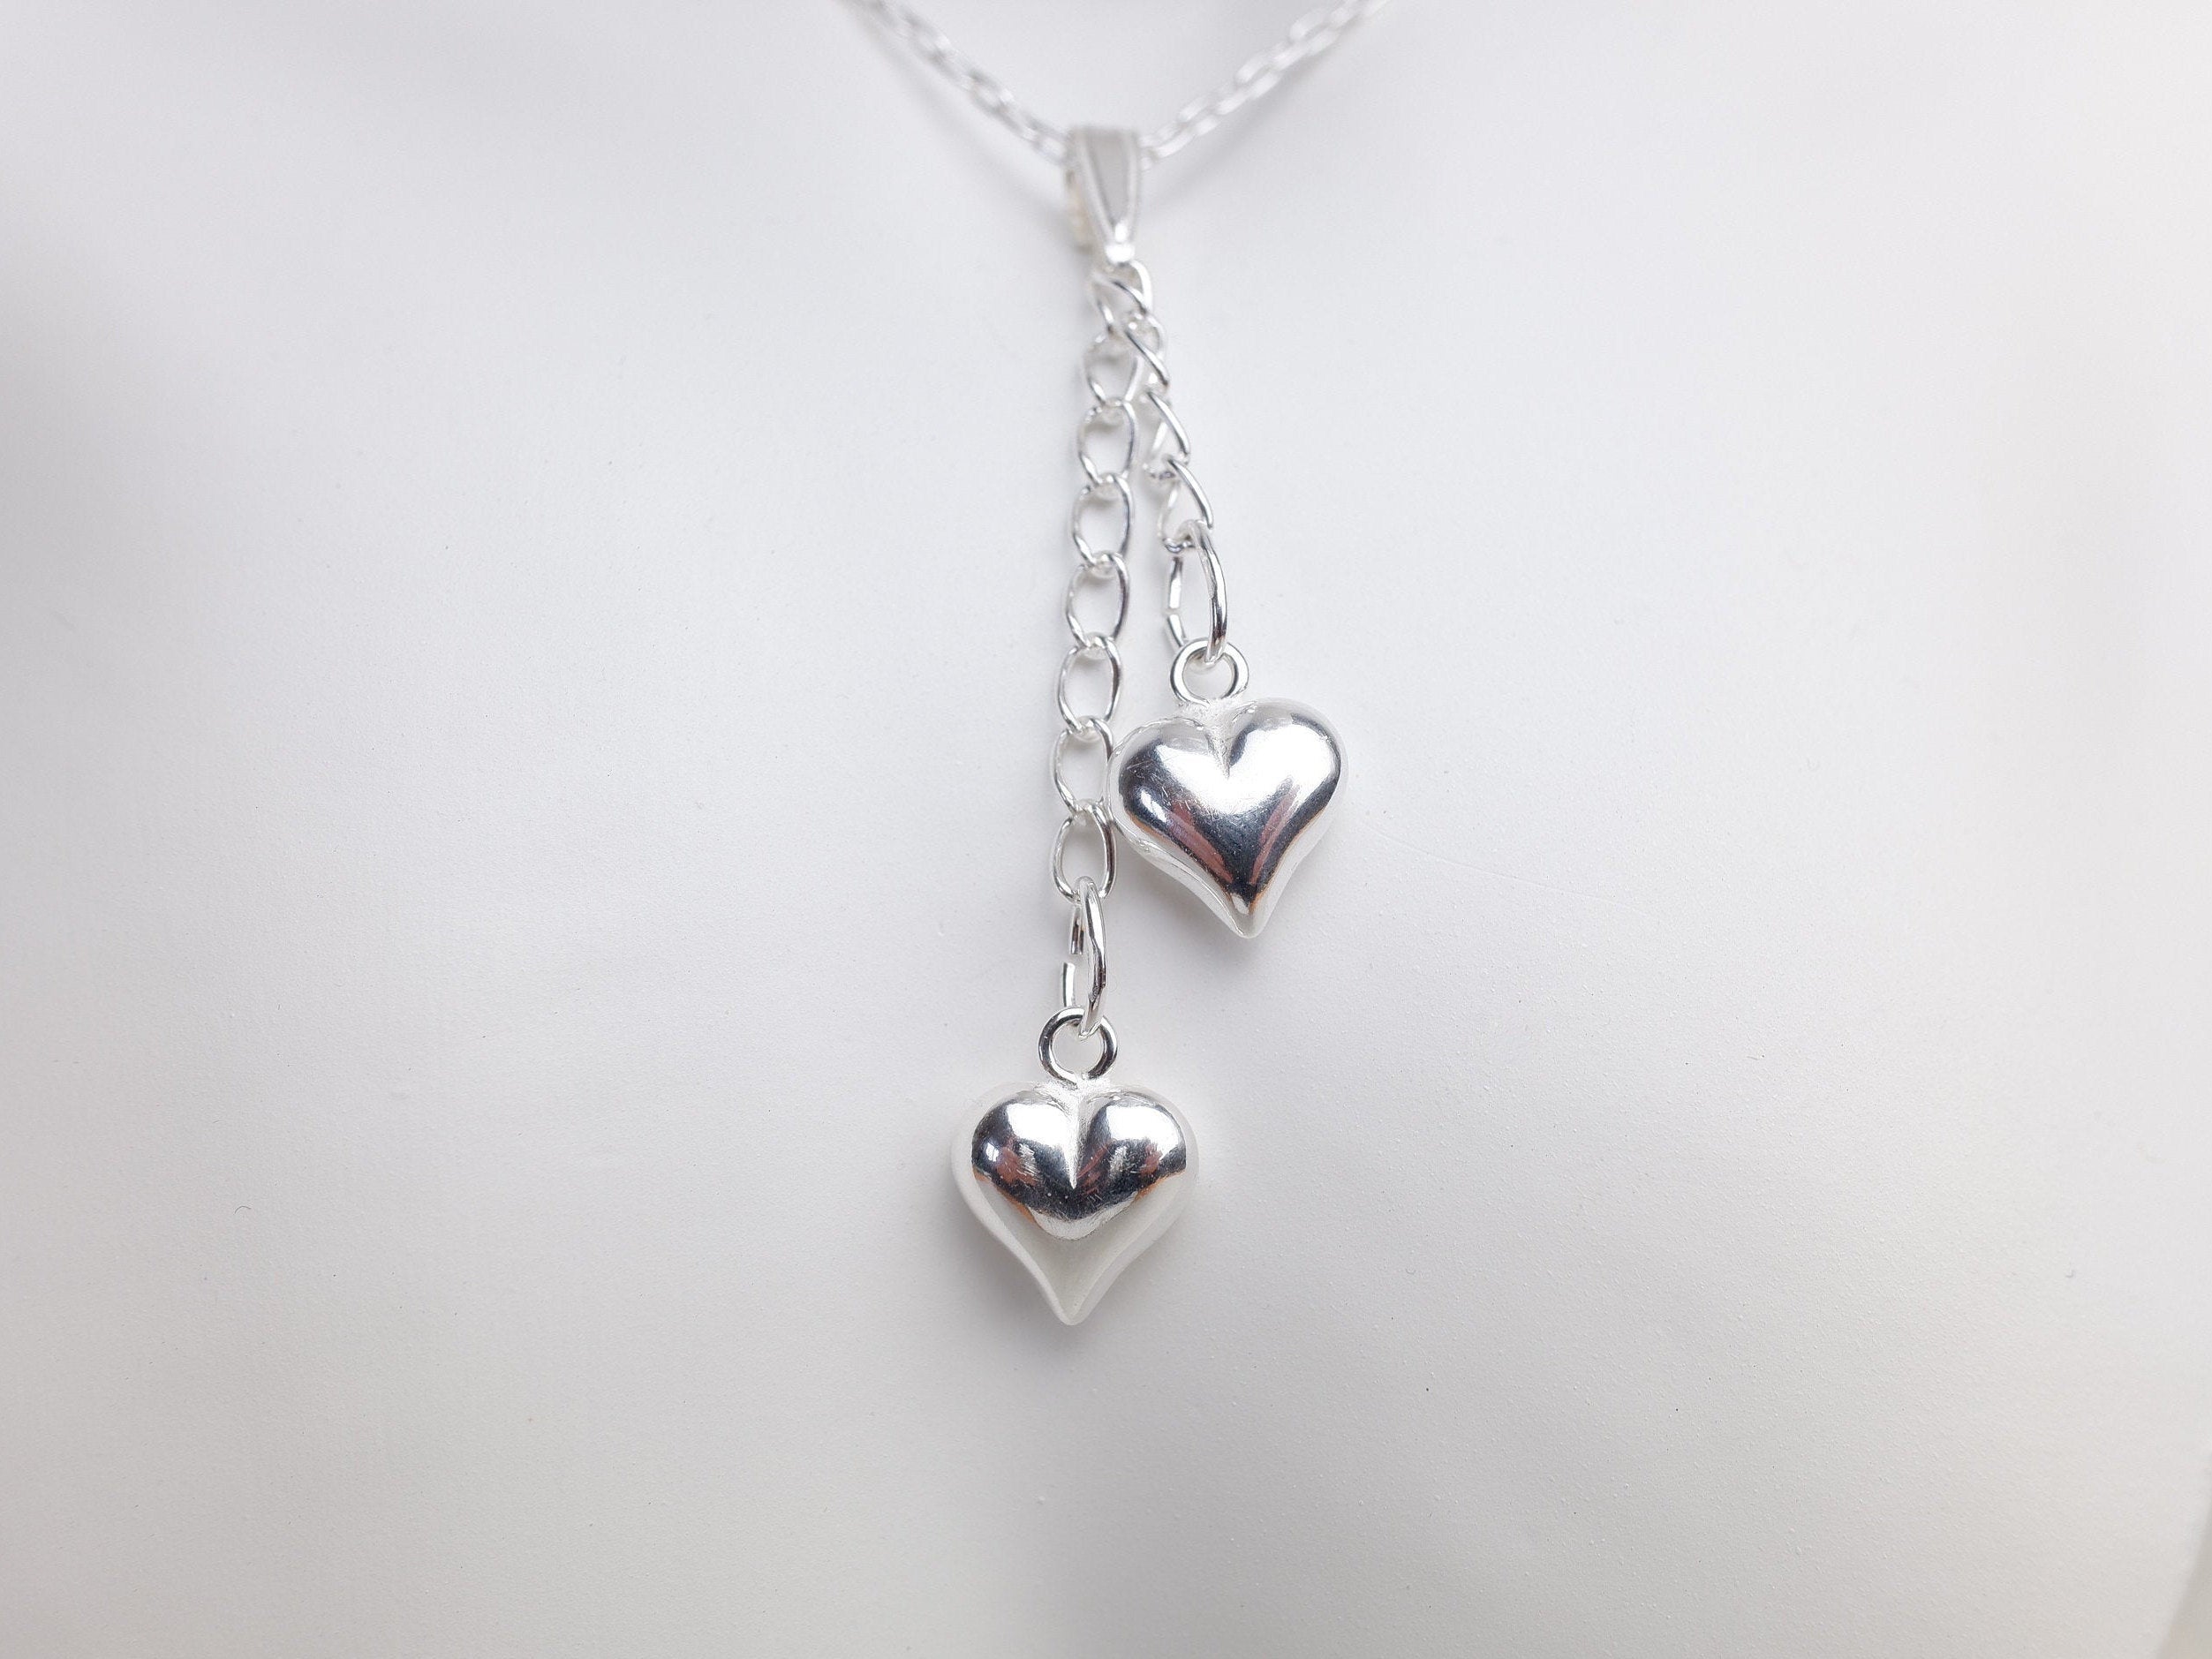 Sterling Silver Double Puffed Heart Charm Pendant Necklace - Sterling Silver Cable Chain - Minimalist Jewellery